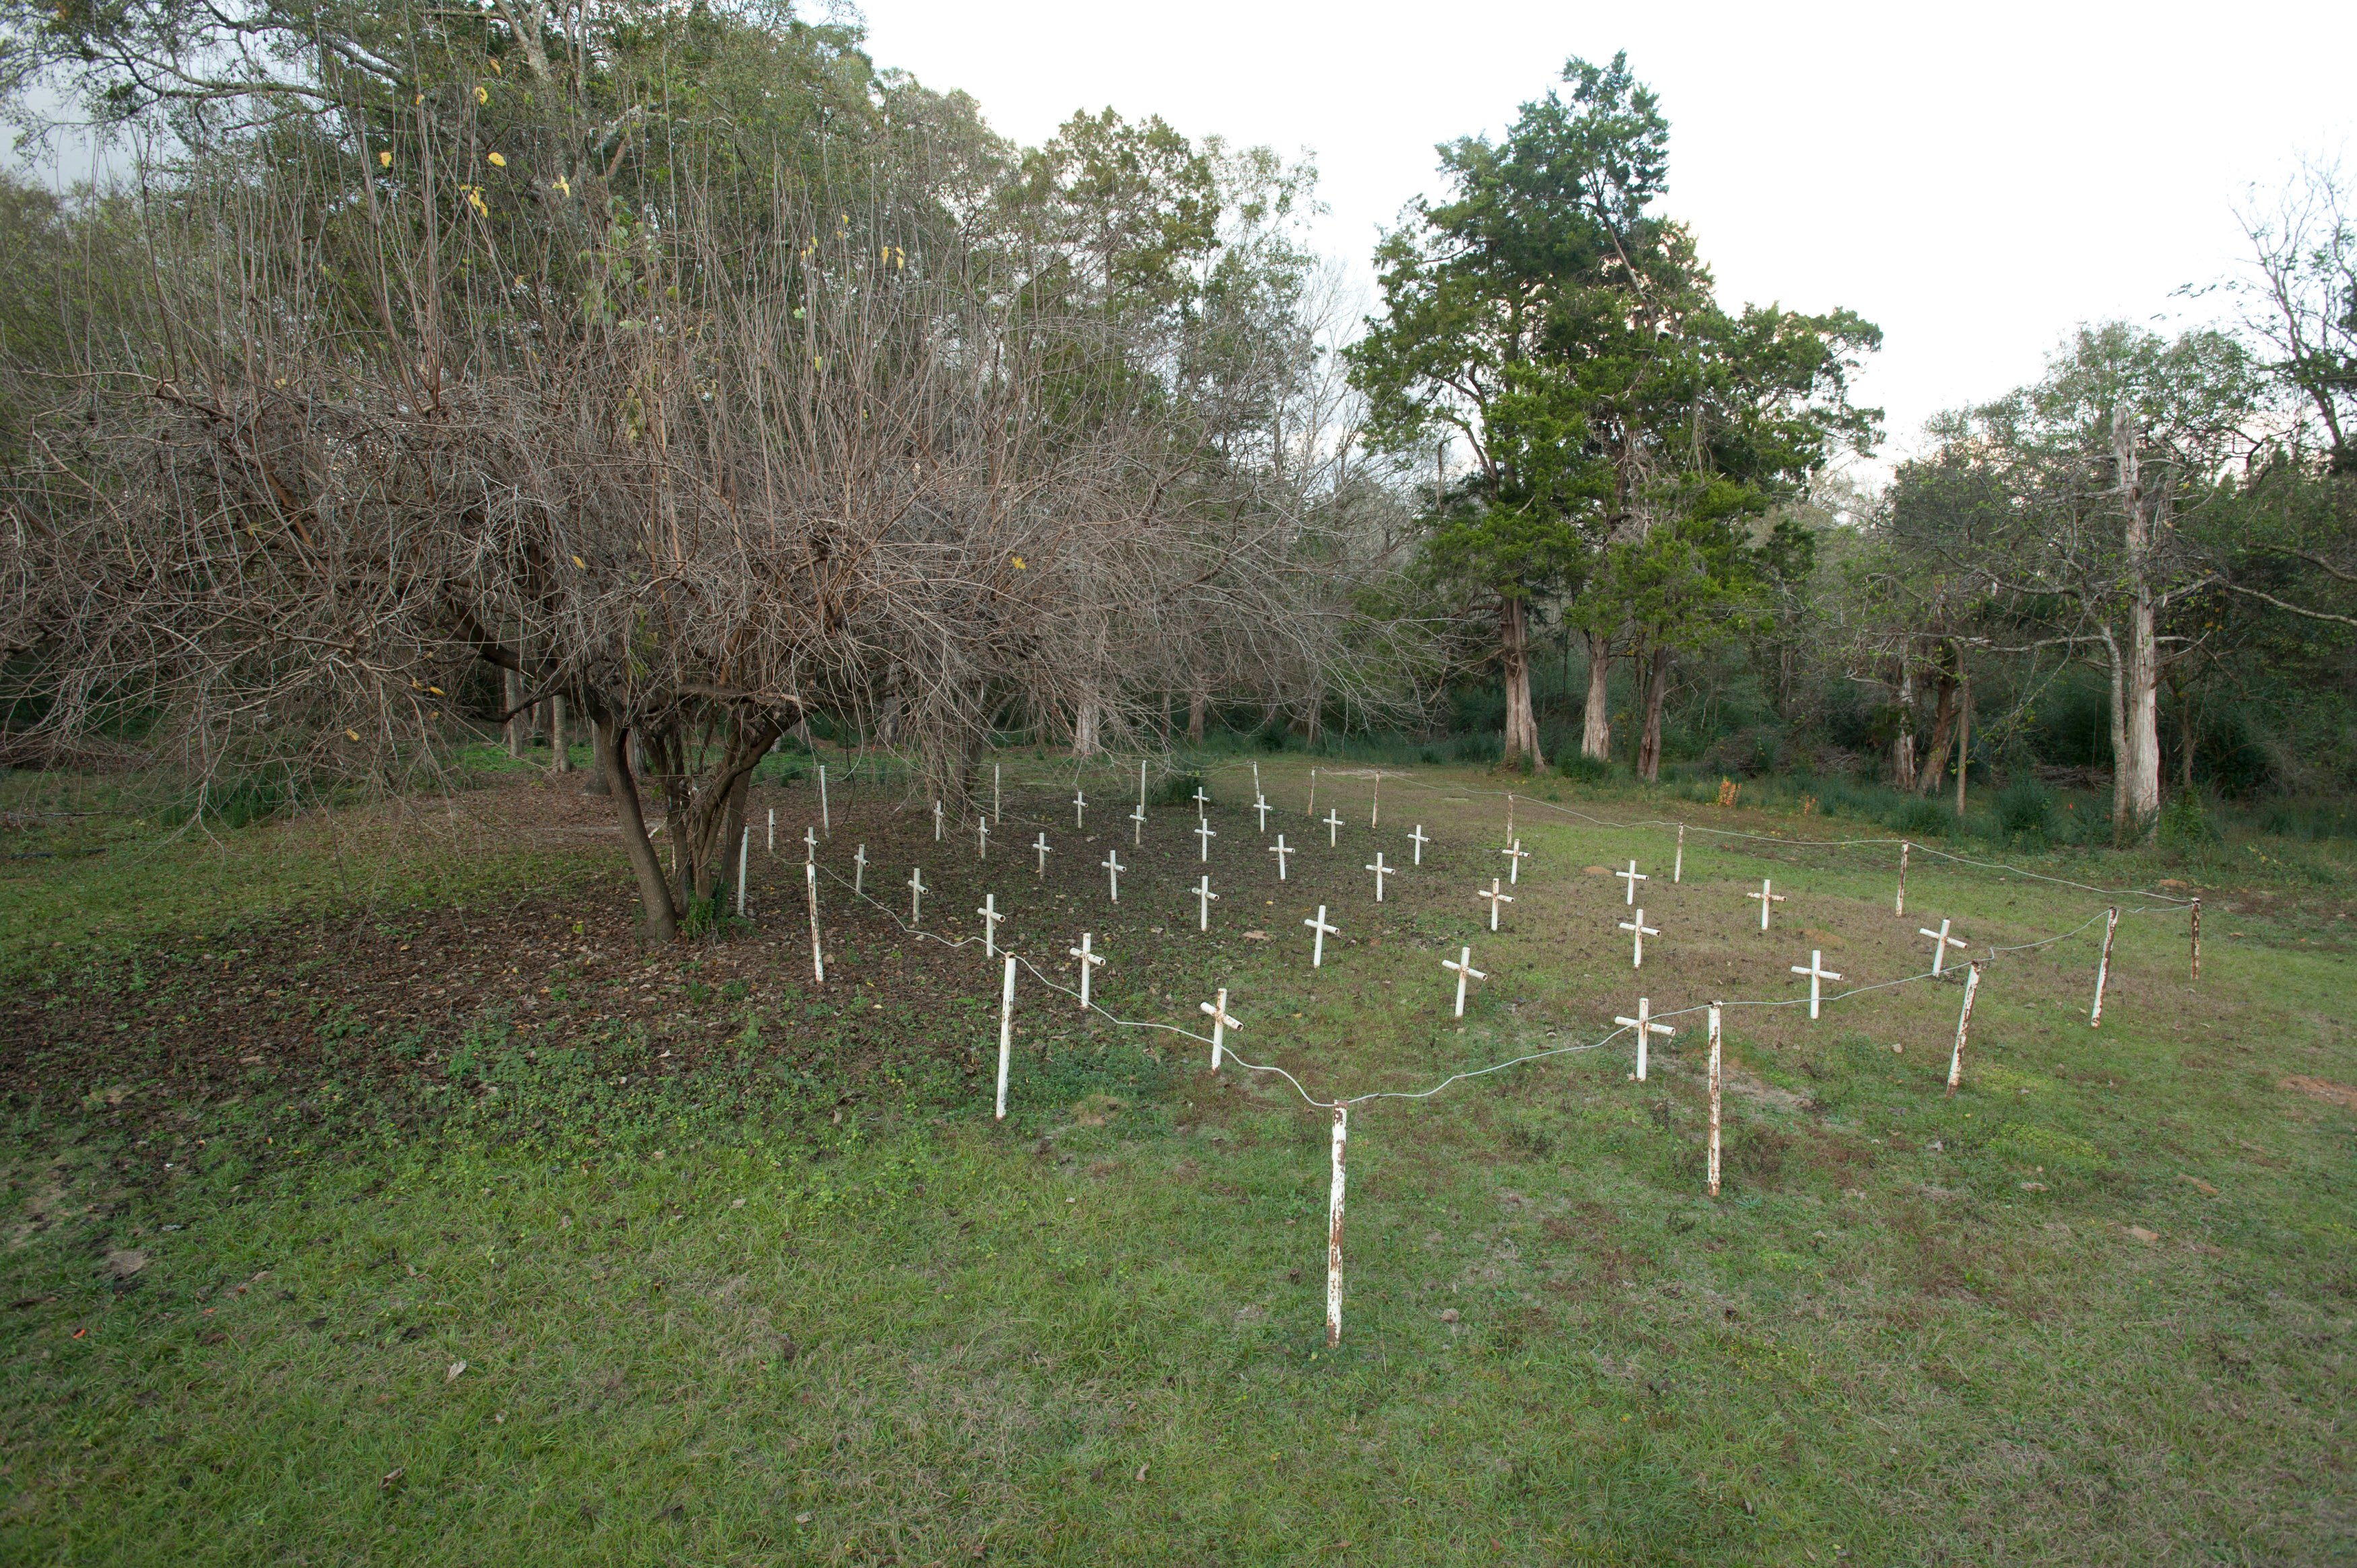 White metal crosses mark graves at the cemetery of the former Arthur G. Dozier School for Boys in Marianna, Florida, December 10, 2012. Investigators in Florida using ground-penetrating radar and soil samples said on Monday they had found at least 50 graves - 19 more than officially reported - on the grounds of a former state reform school for boys. REUTERS/Michael Spooneybarger (UNITED STATES - Tags: EDUCATION SOCIETY) - TM3E8CA1J0O01